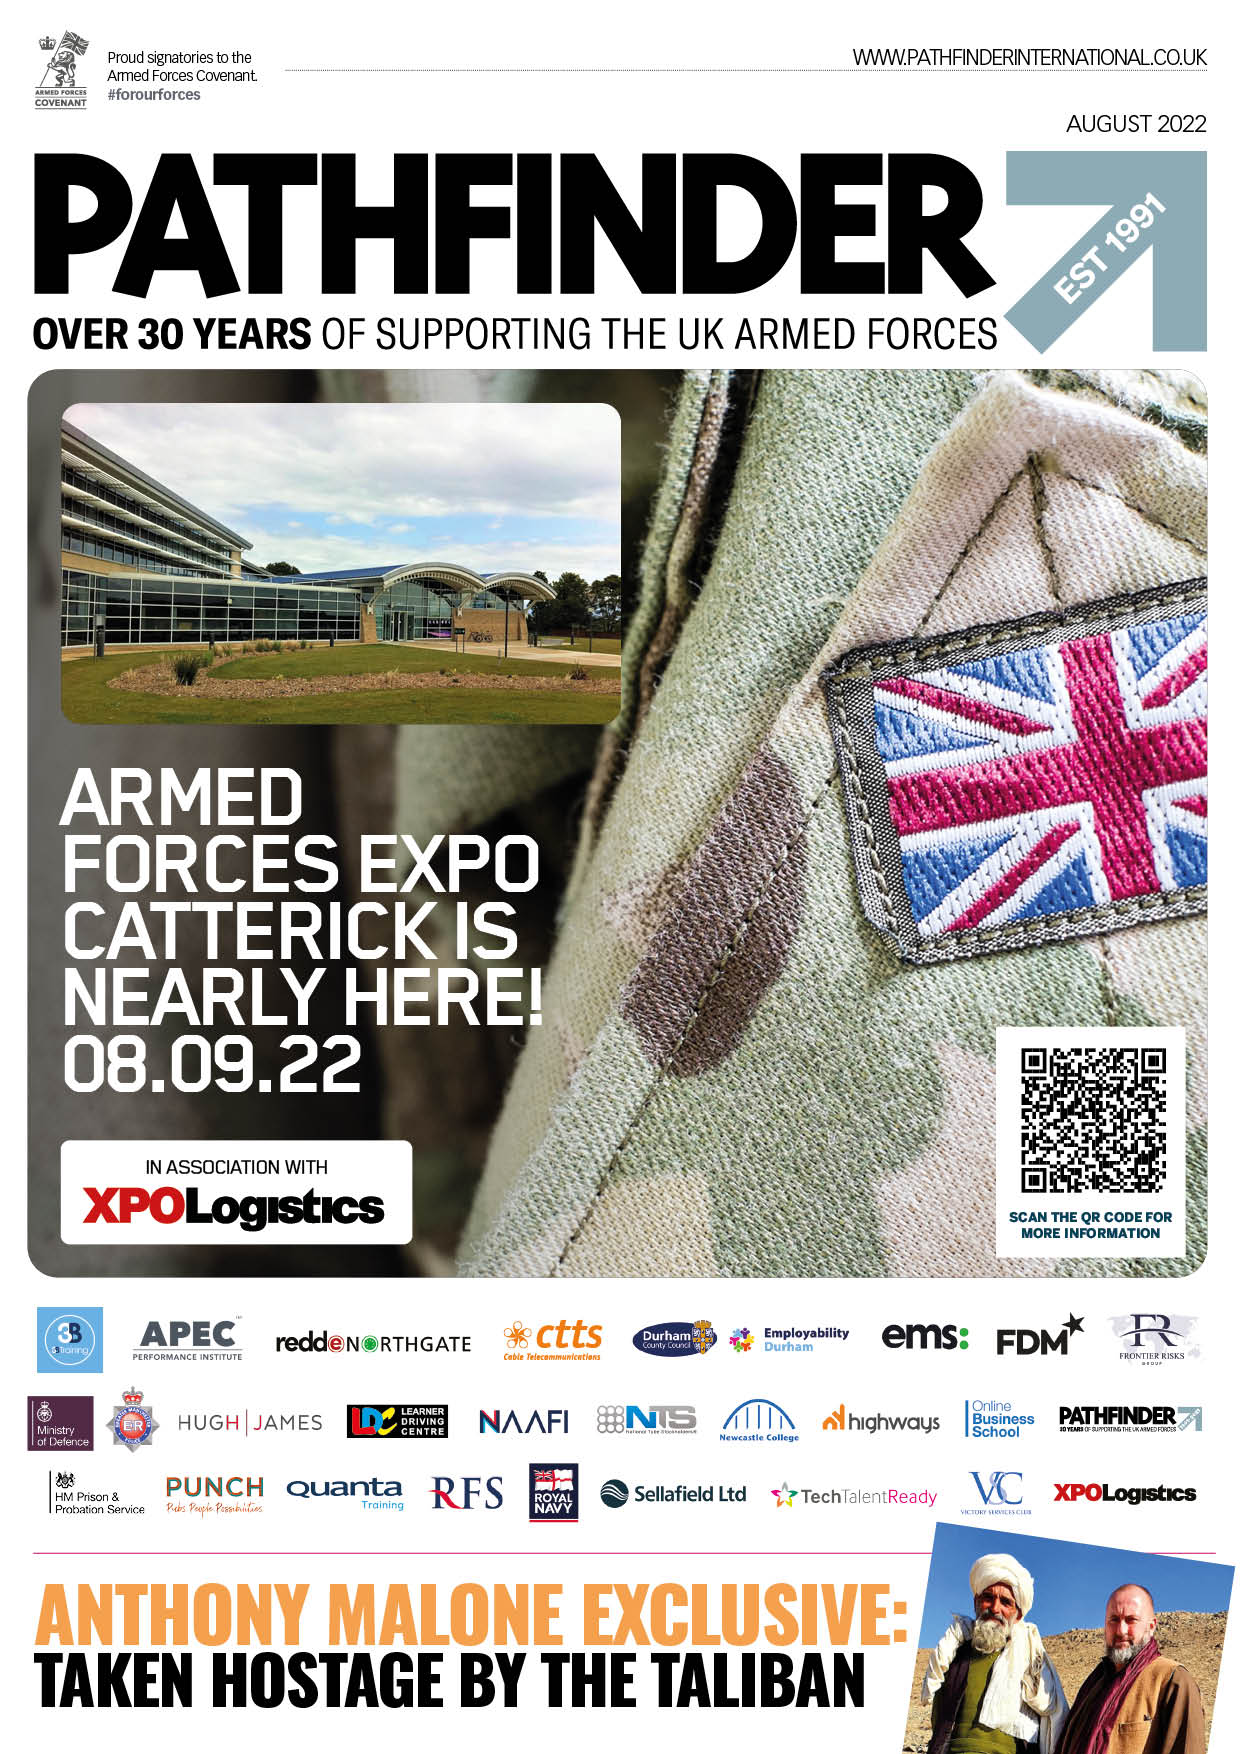 Armed Forces Expo Catterick – Your Questions Answered!